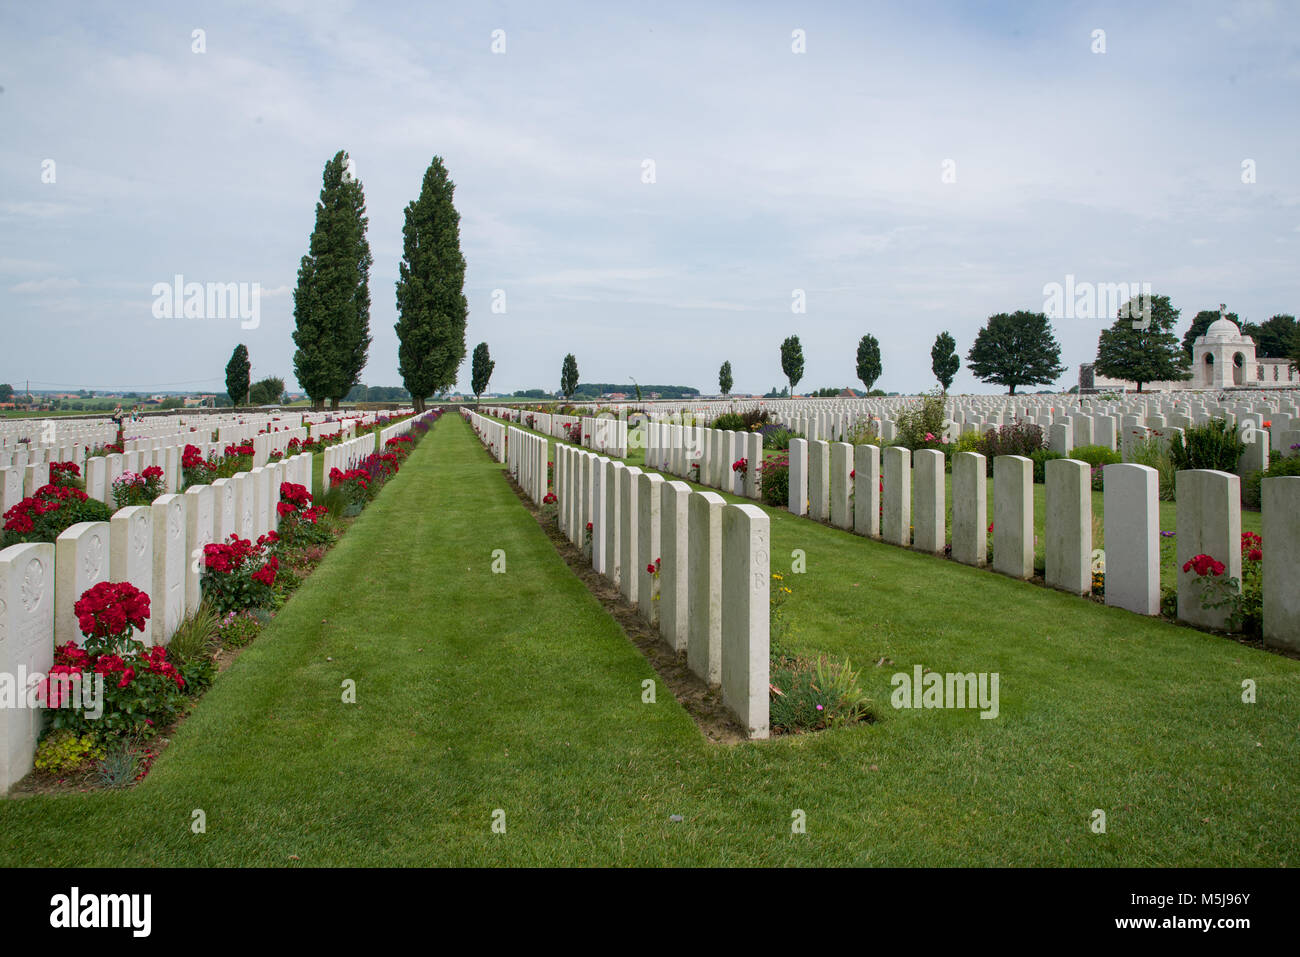 Rows of graves at Tyne Cot Military Cemetery, Leper, Belgium Stock Photo